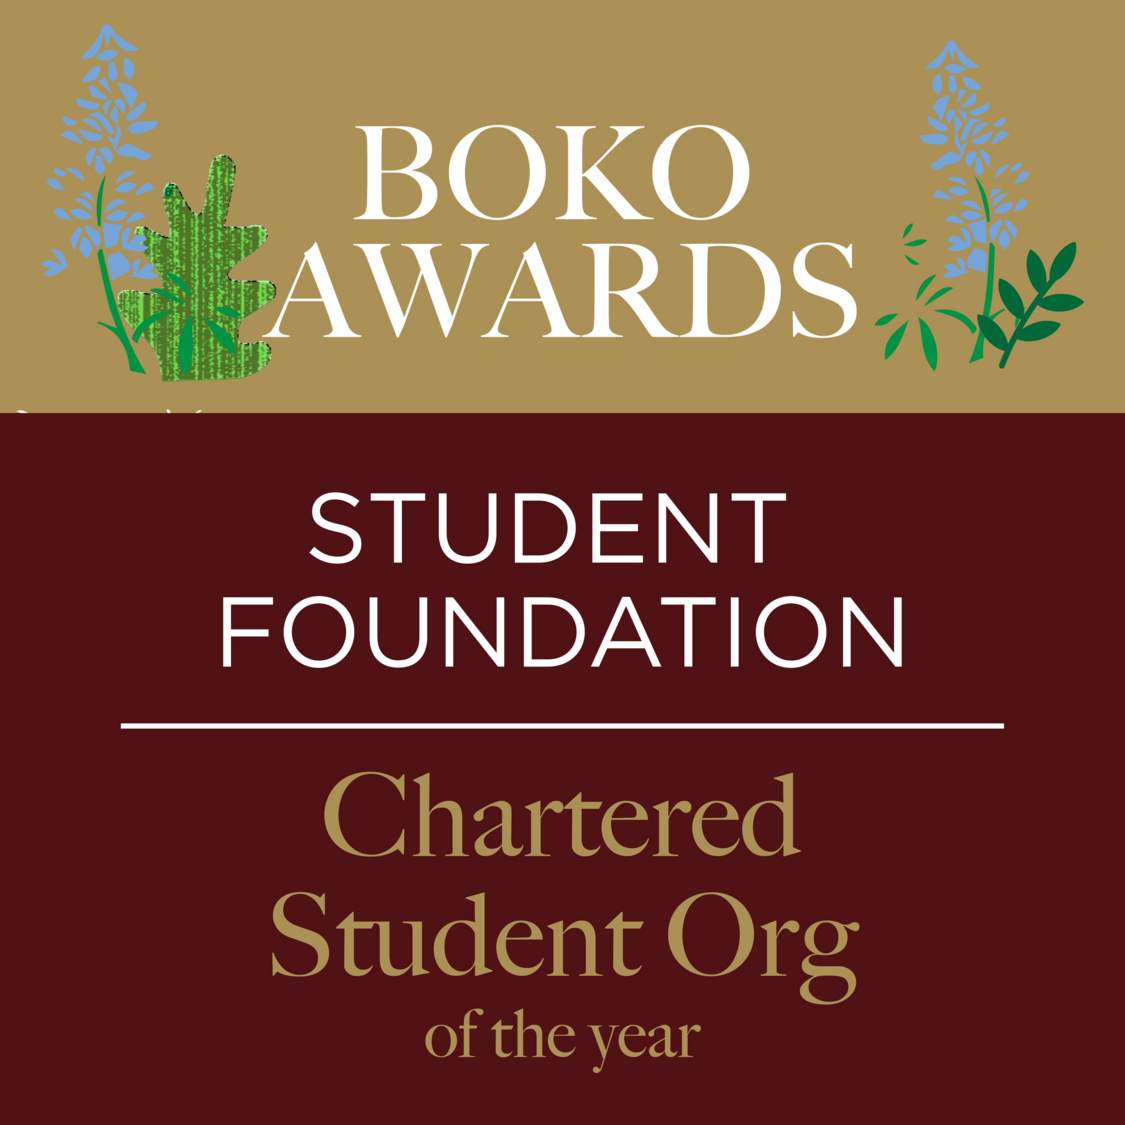 Picture of text displaying that Student Foundation won the Chartered Student Organization of the Year award.